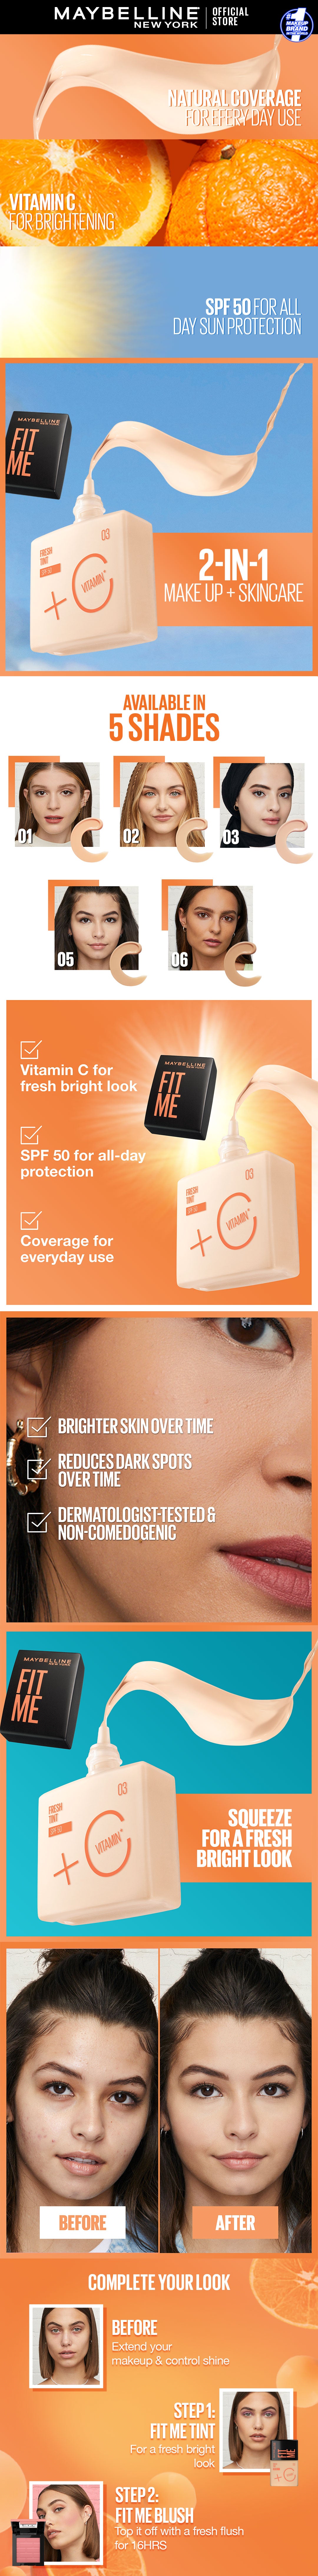 Maybelline New York Fit Me Fresh Tint With SPF 50 & Vitamin C, Shade 03 |  Natural Coverage Skin Tint For Daily Use 30 ml